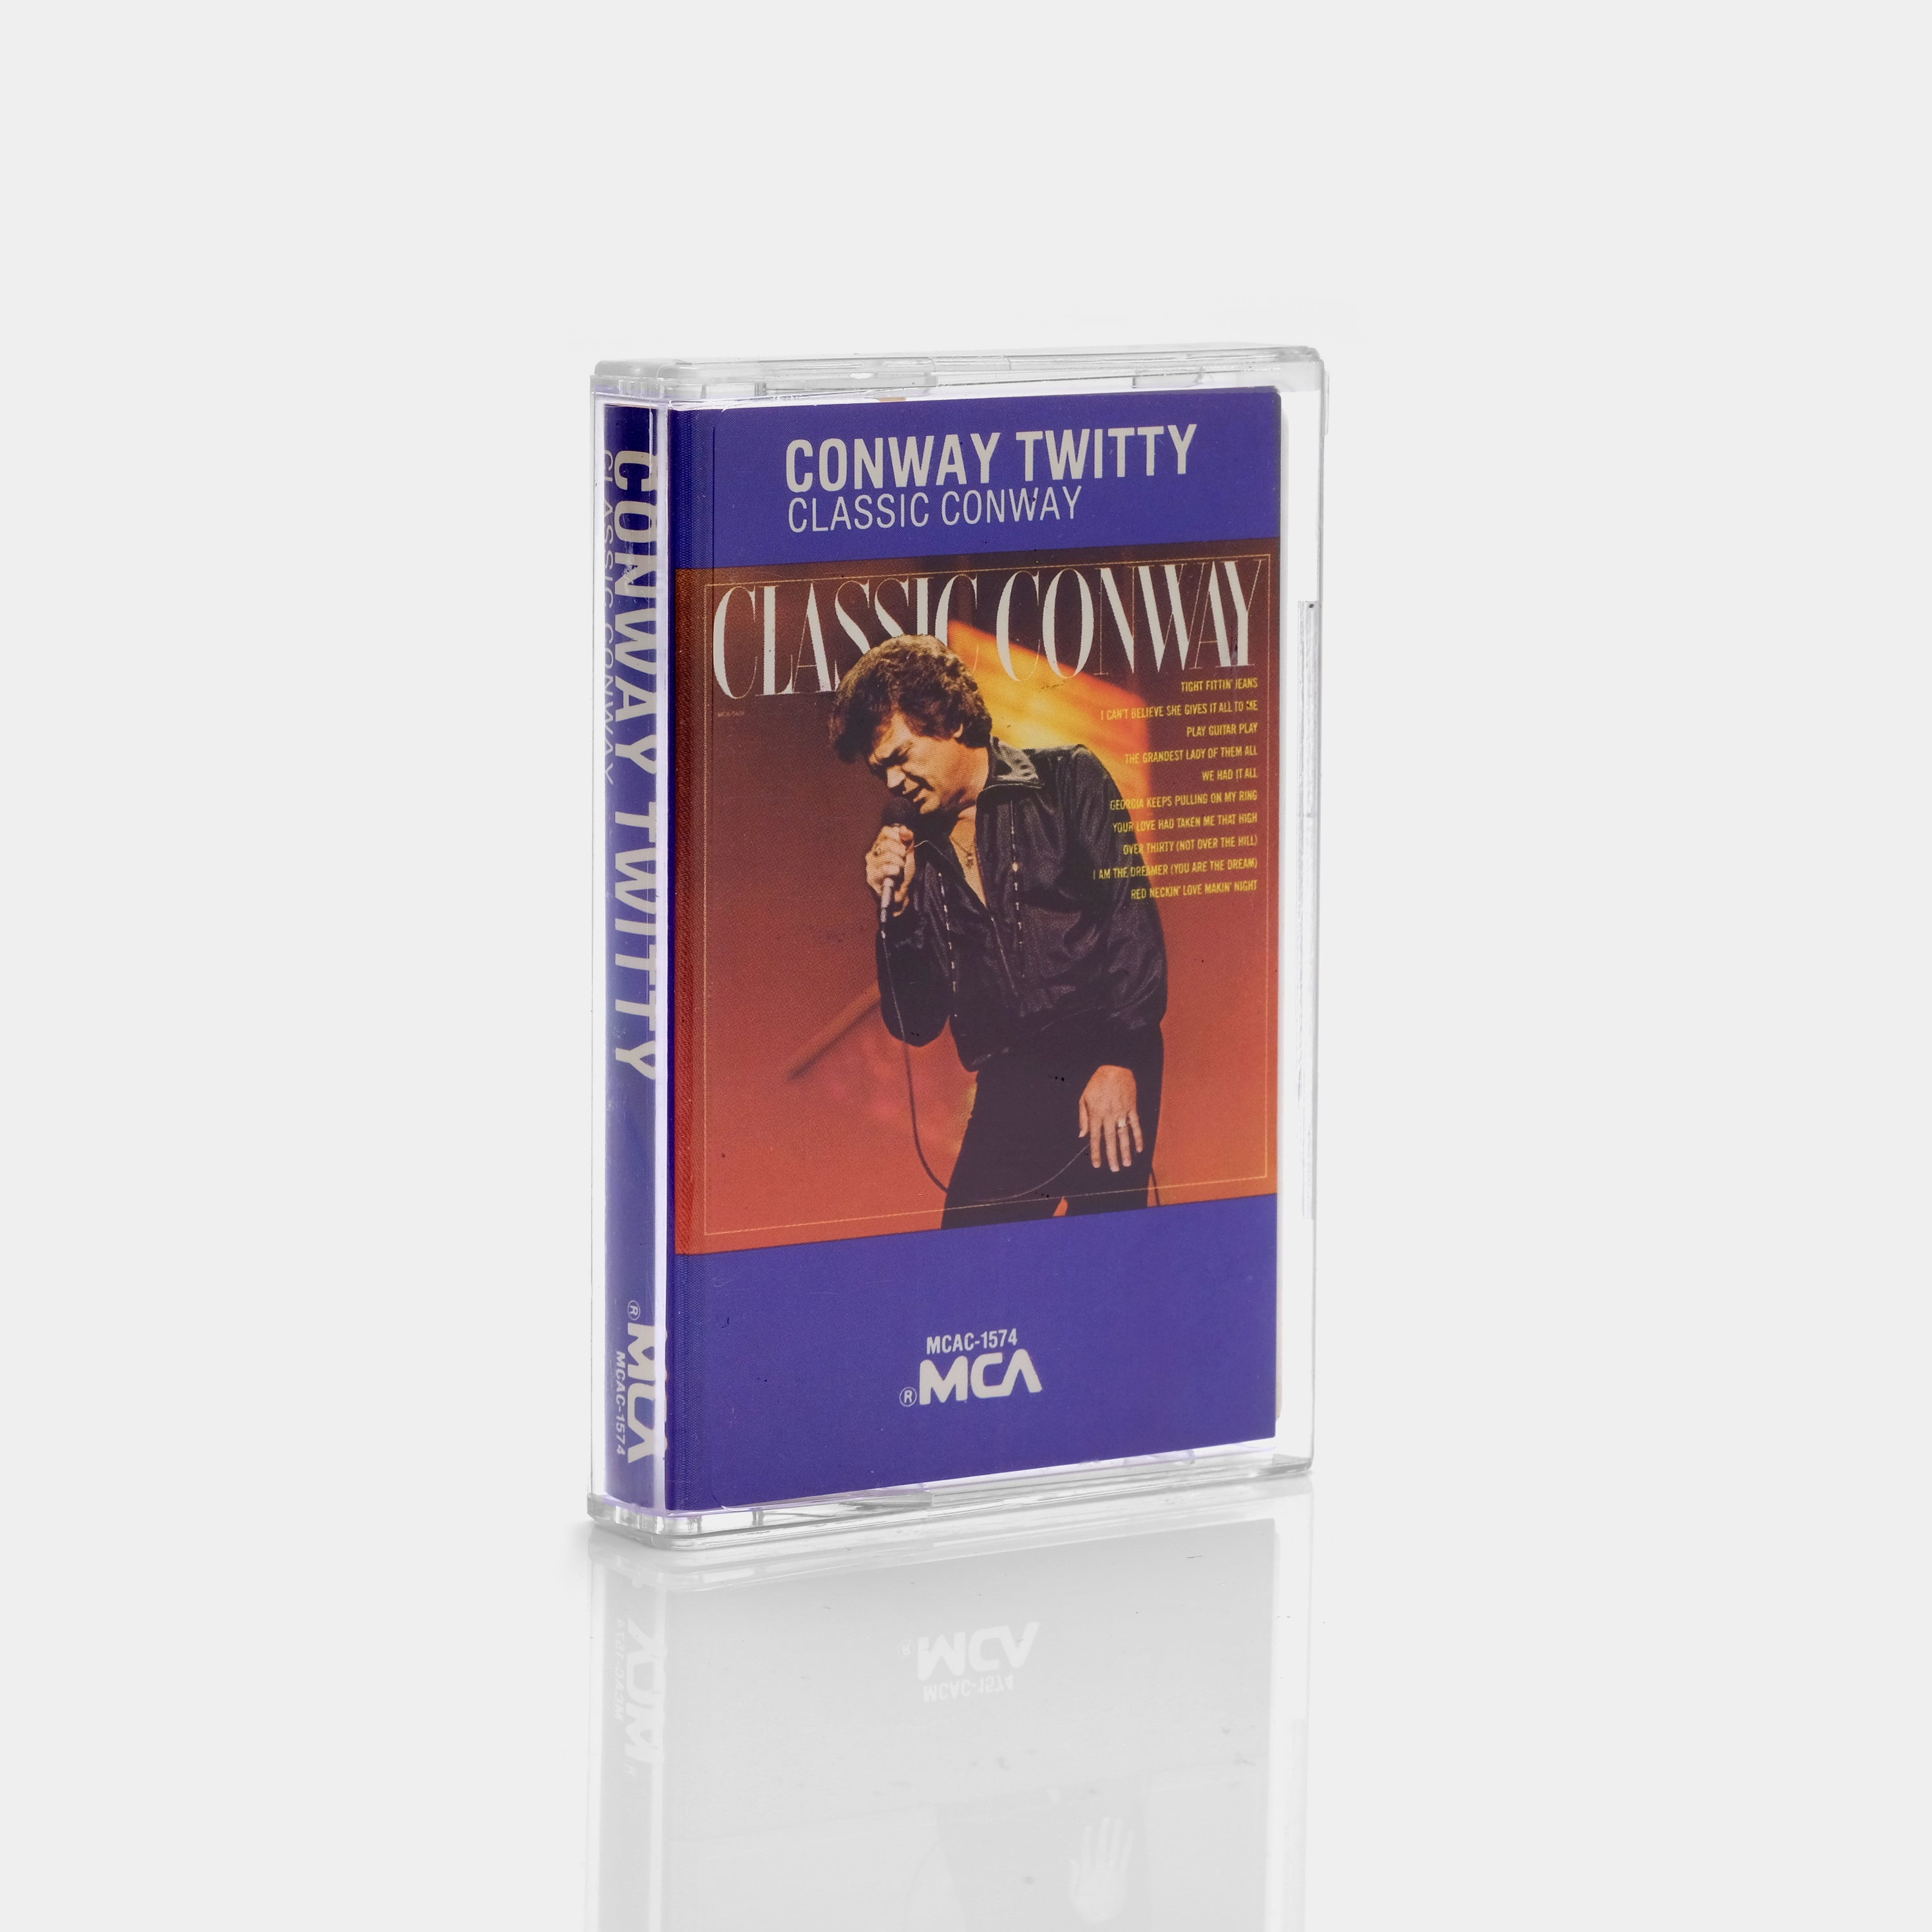 Conway Twitty - Classic Conway Cassette Tape